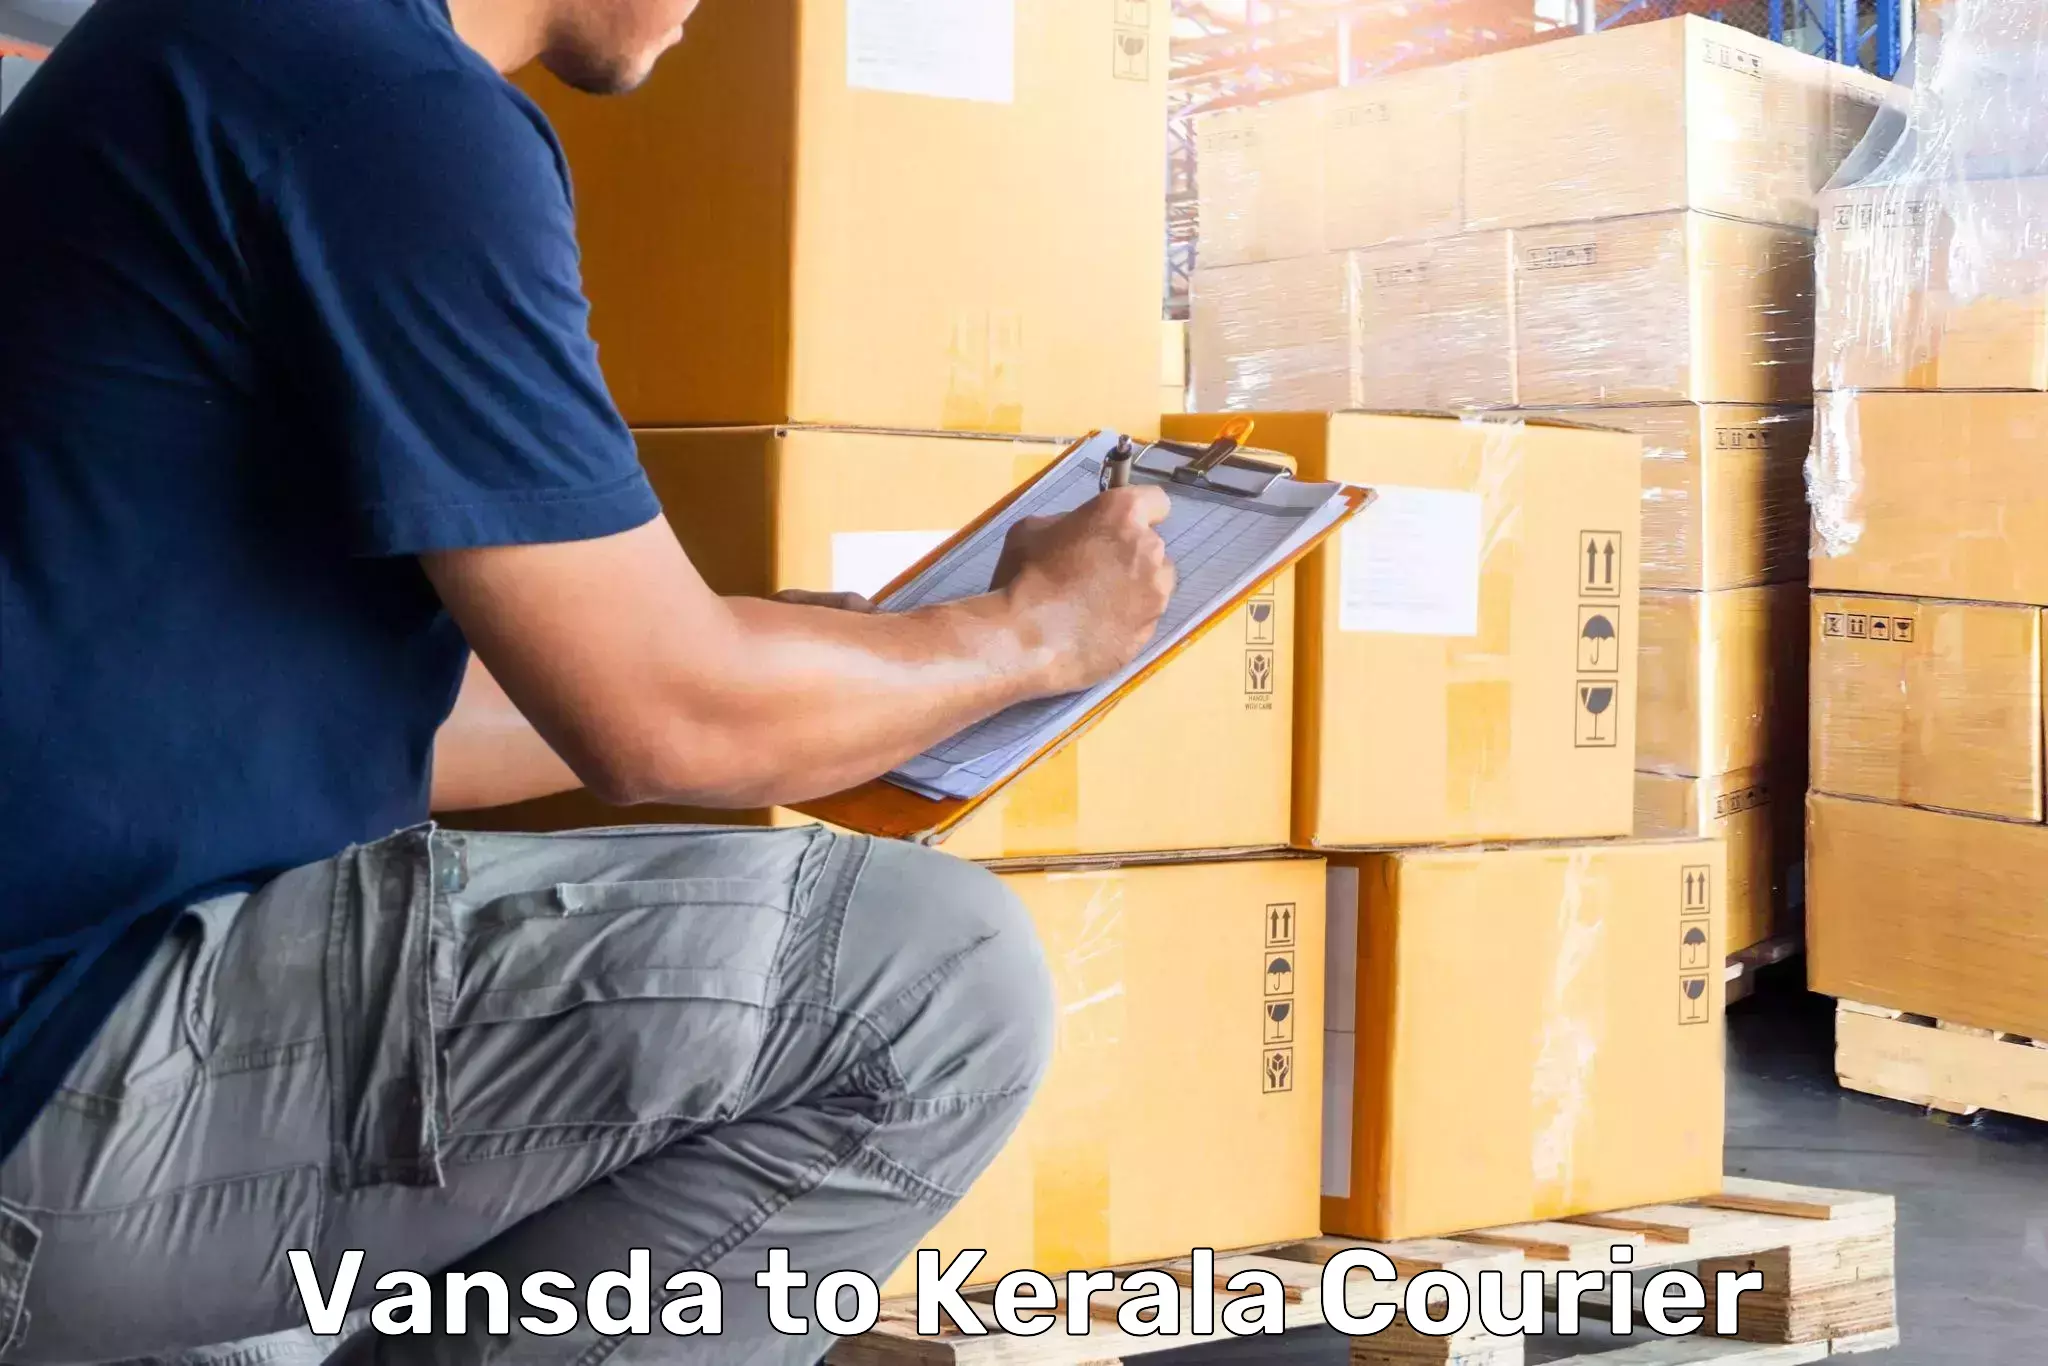 Luggage delivery app Vansda to Punalur